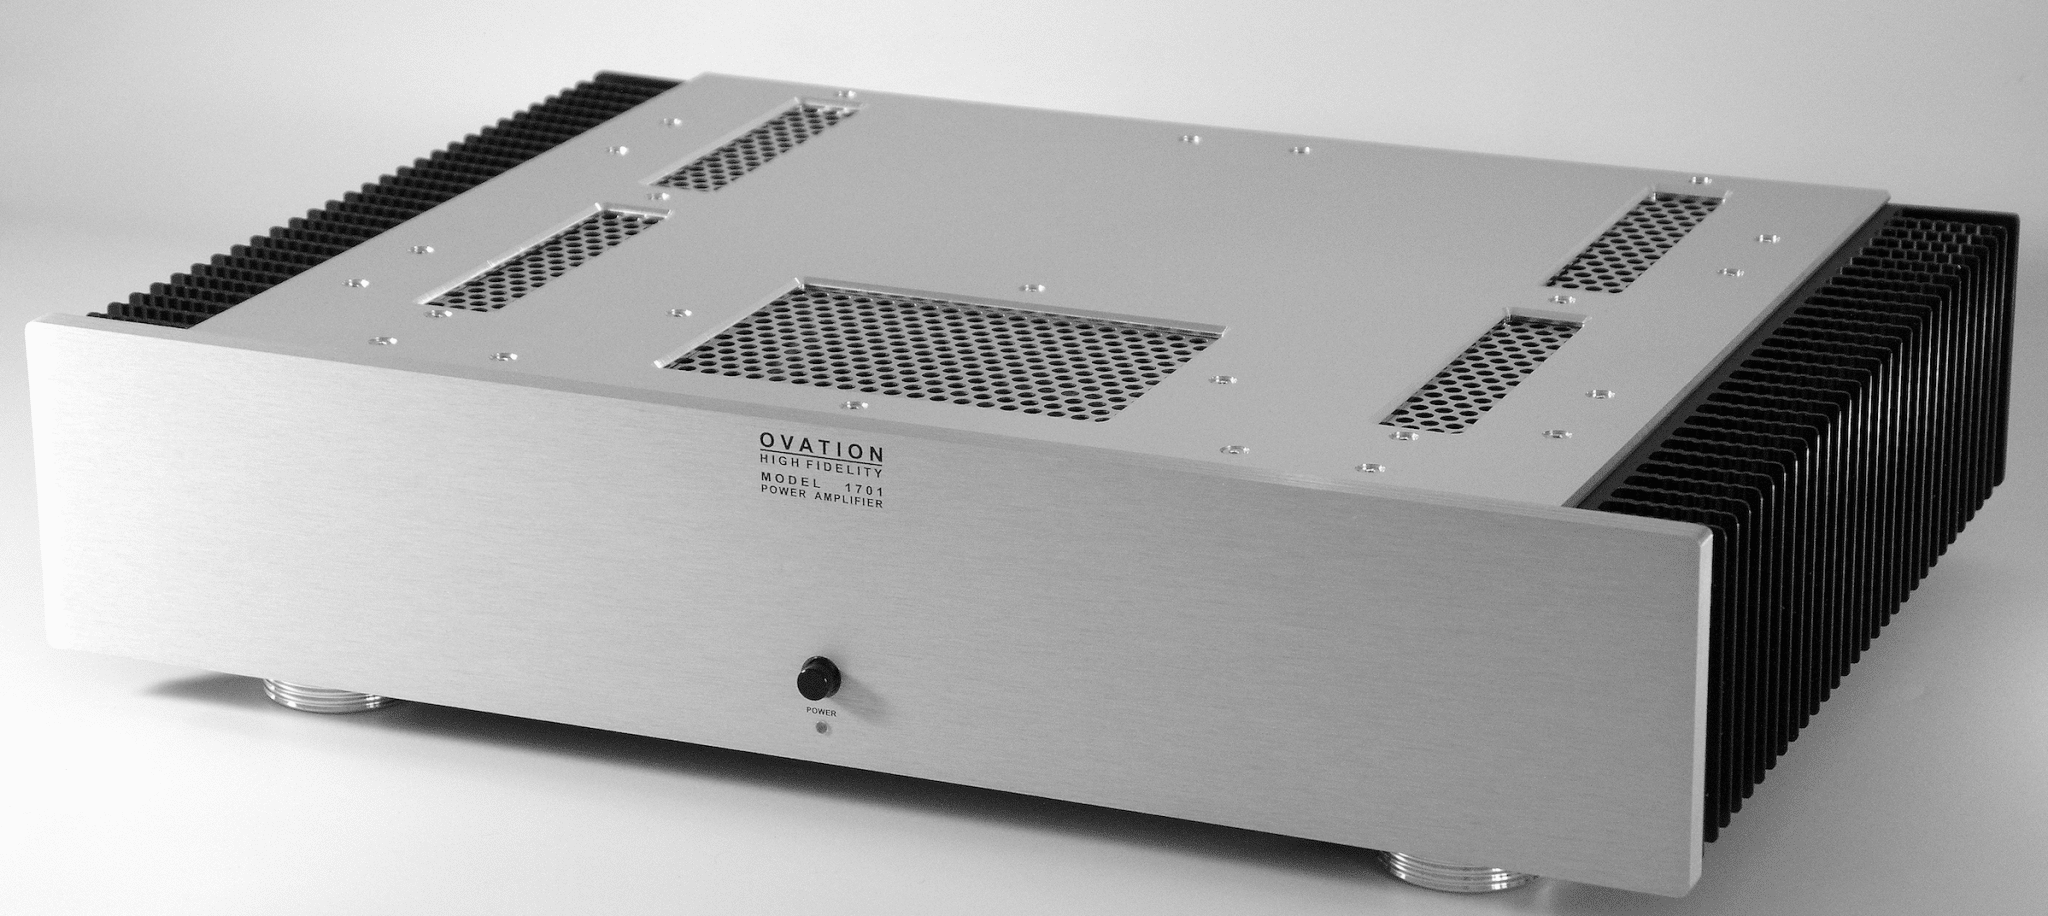 If you need to marry some power to your Pre, Paul Rigby may have the answer as he reviews the Model 1701 Ovation High Fidelity’s 100W Current Mode Topology class AB power amplifier